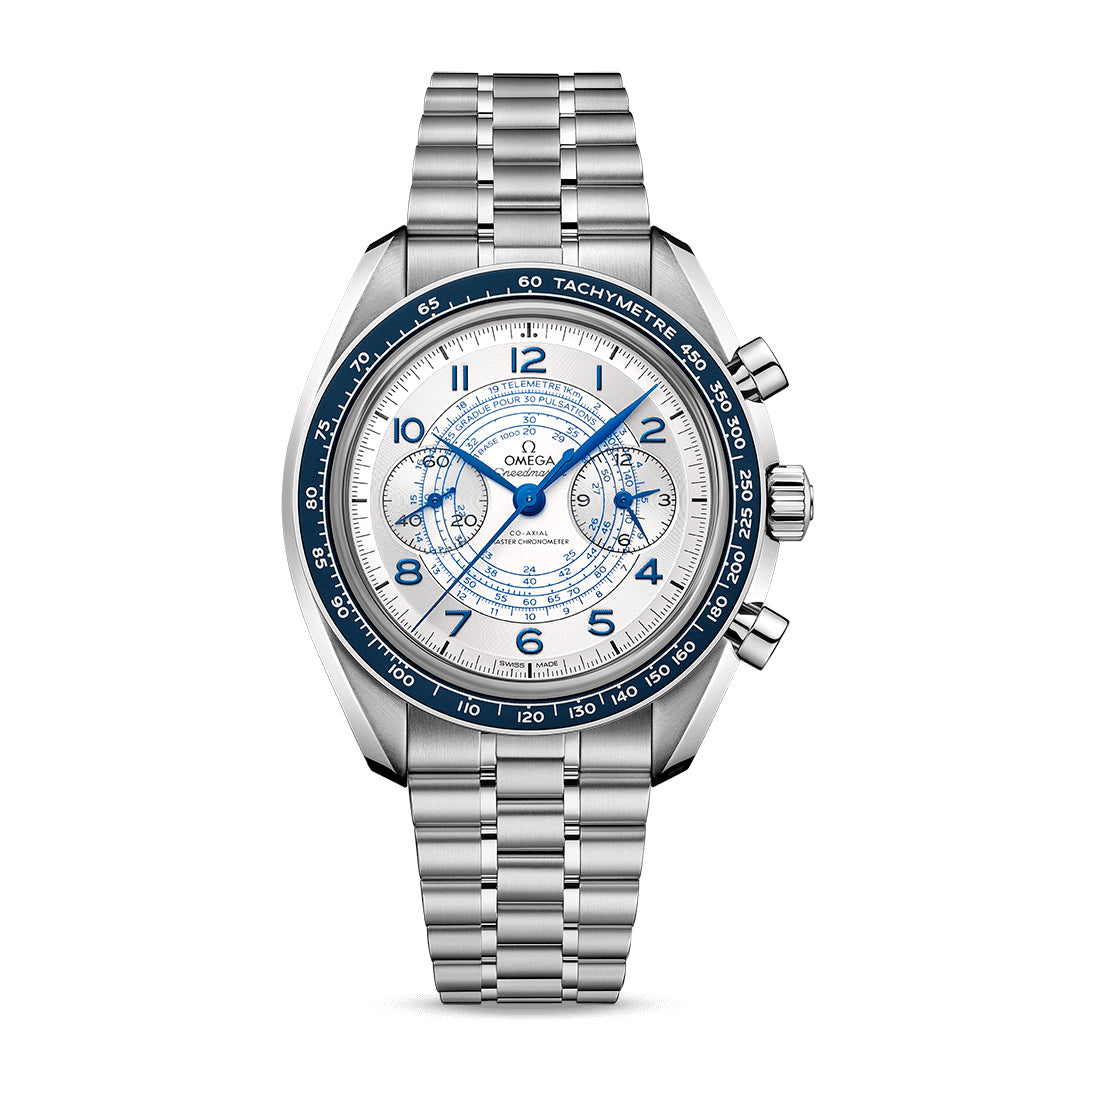 Omega Speedmaster Chronoscope Co-Axial Master Chronometer Chronograph Watch, 43mm Silver Dial, 32930435102001